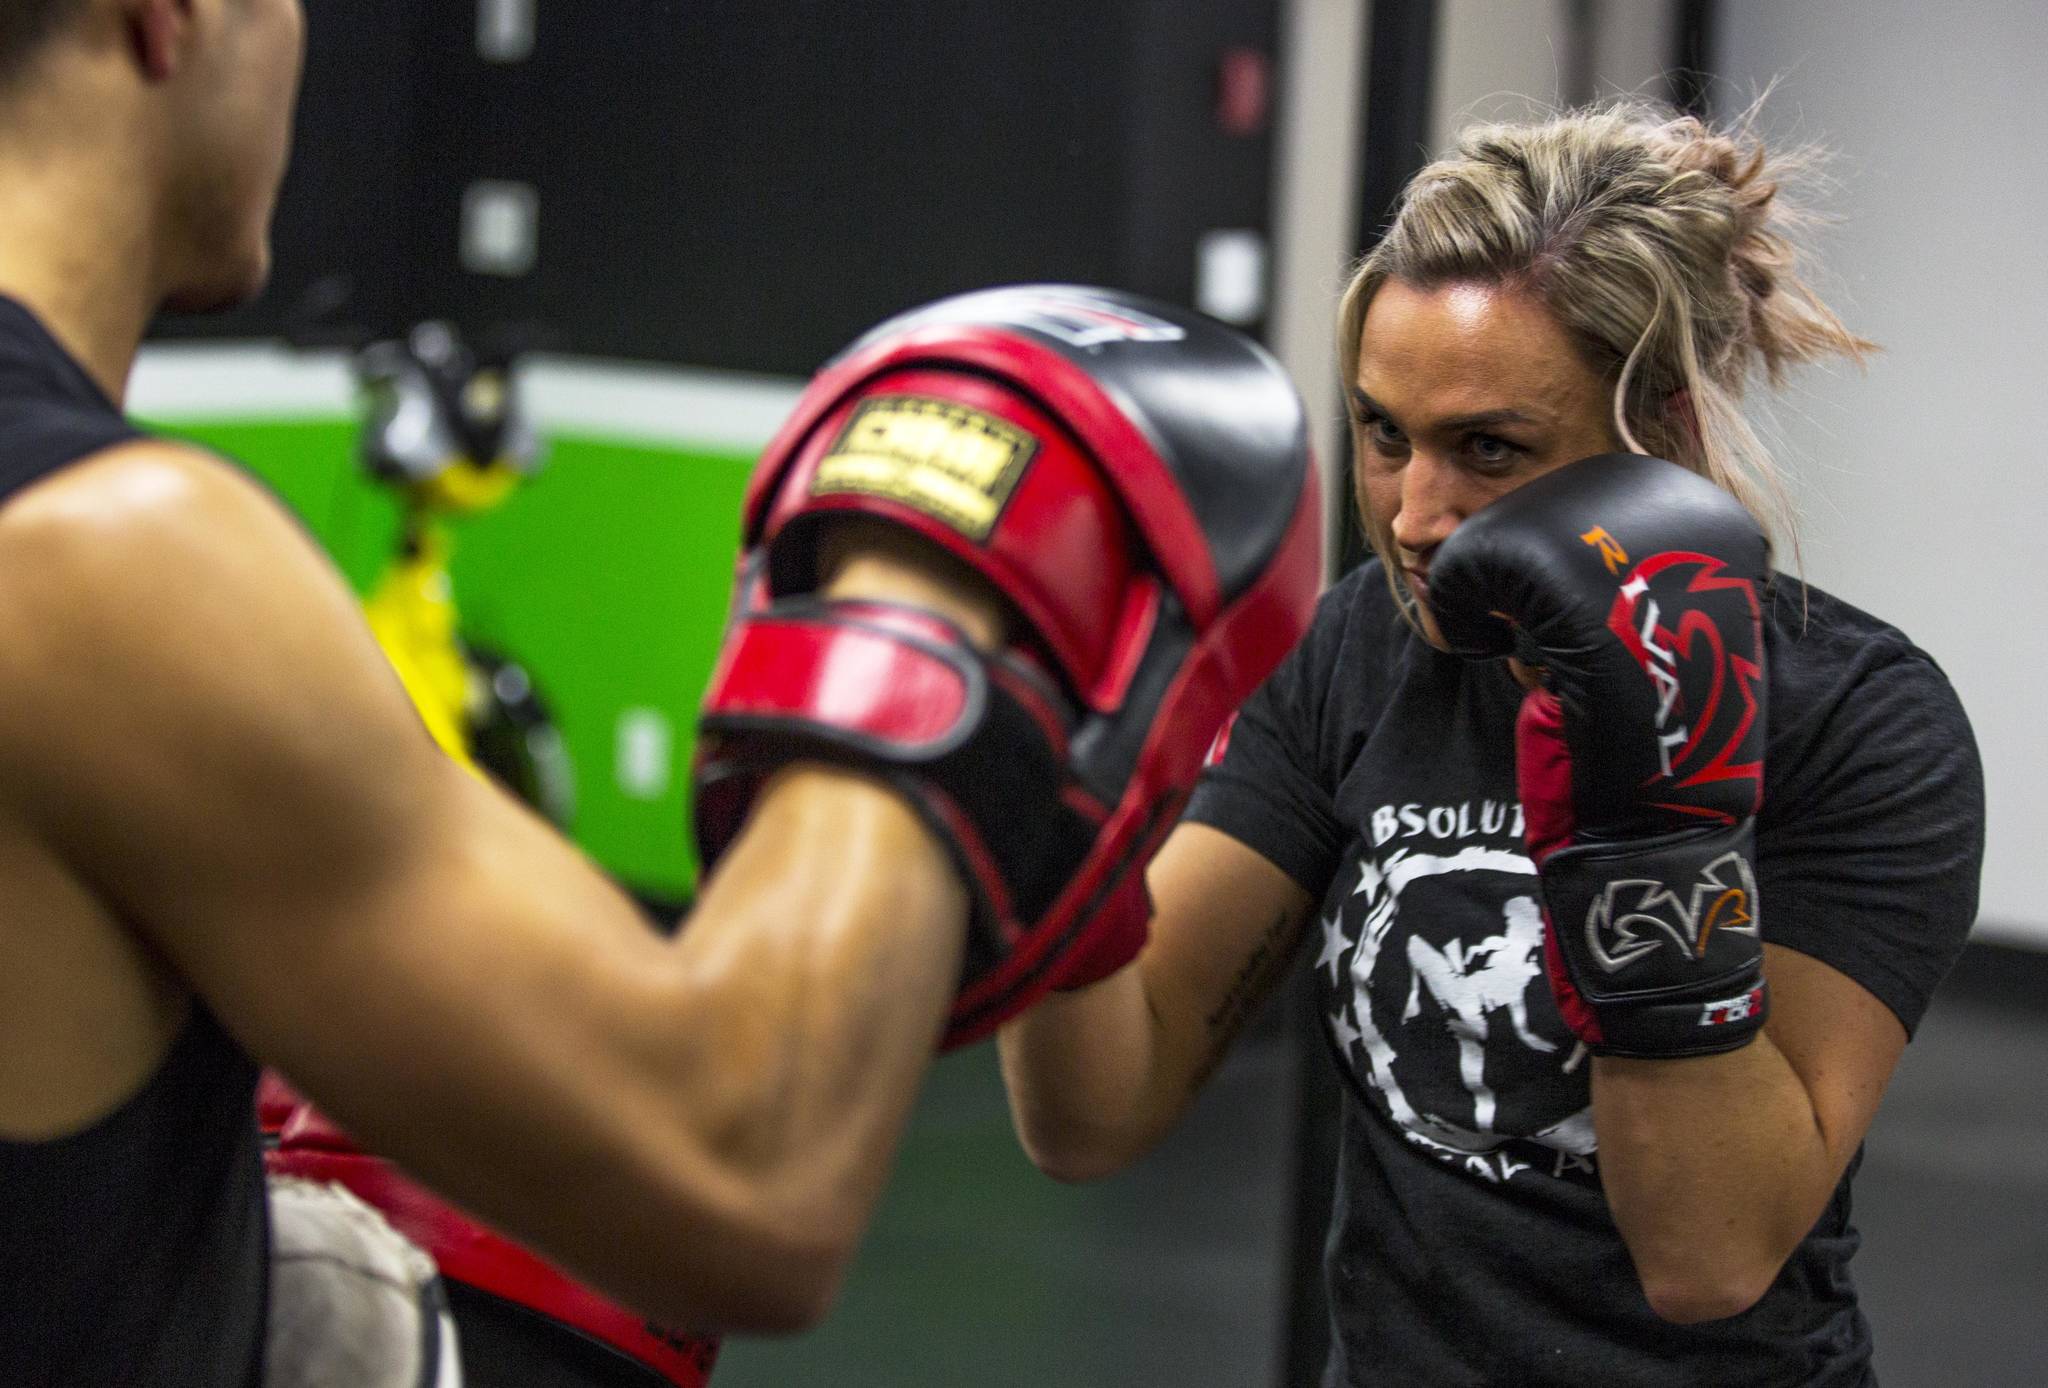 Muay Thai fighter Stephanie Schmale spars with her coach Will Quijada, co-owner of Absolute Fitness Red Deer. Schmale will be competing against Team USA for a North American title mid-November. Robin Grant/Red Deer Express                                Muay Thai fighter Stephanie Schmale spars with her coach Will Quijada, co-owner of Absolute Fitness Red Deer. Schmale will be competing against Team USA for a North American title Nov. 17th. Robin Grant/Red Deer Express